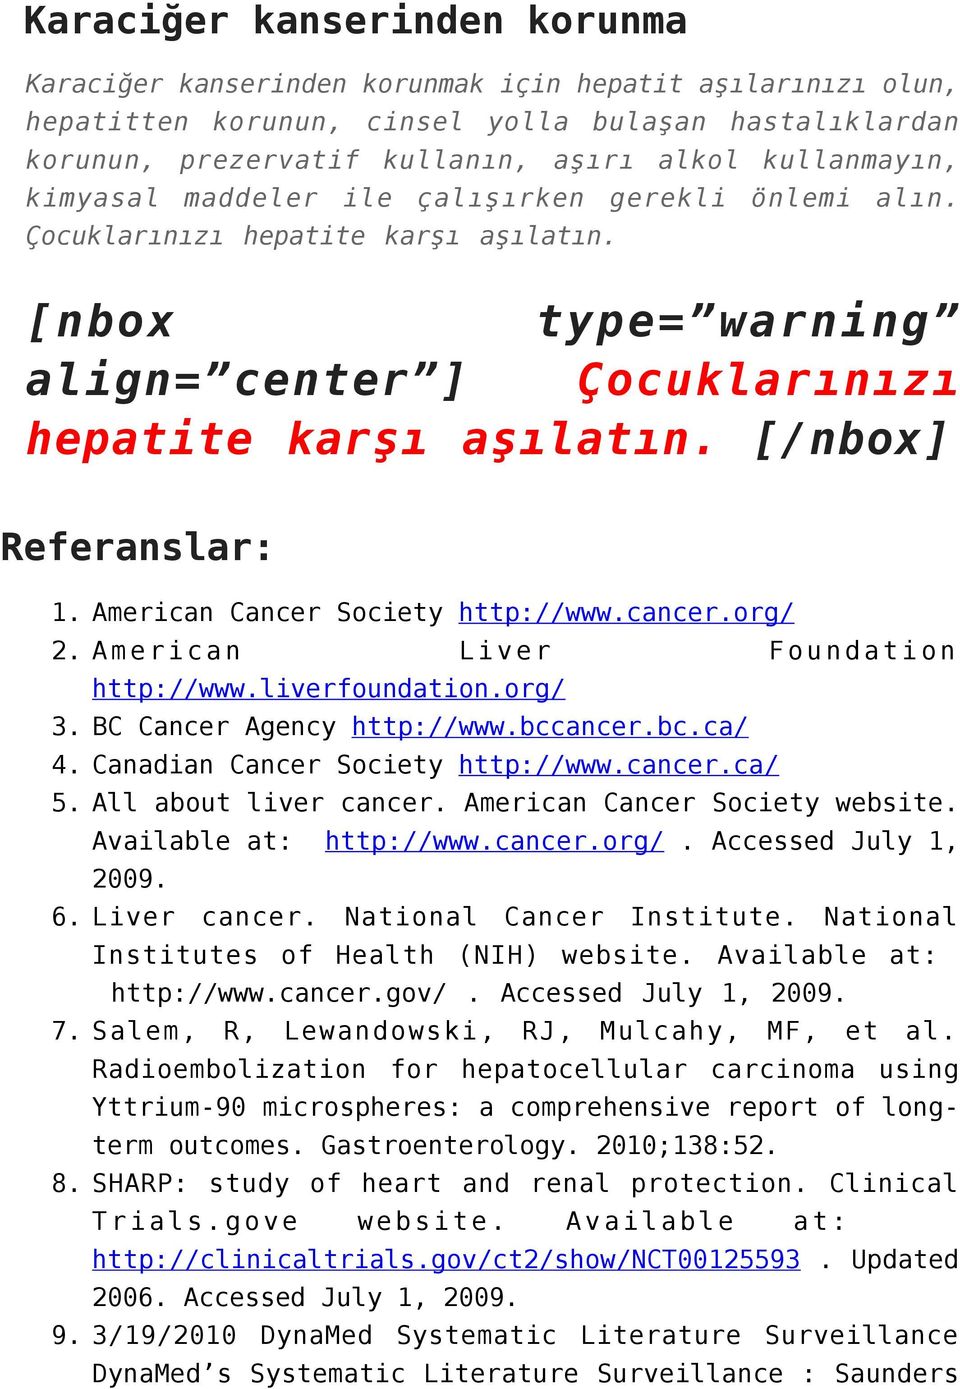 [/nbox] Referanslar: 1. American Cancer Society http://www.cancer.org/ 2. American Liver Foundation http://www.liverfoundation.org/ 3. BC Cancer Agency http://www.bccancer.bc.ca/ 4.